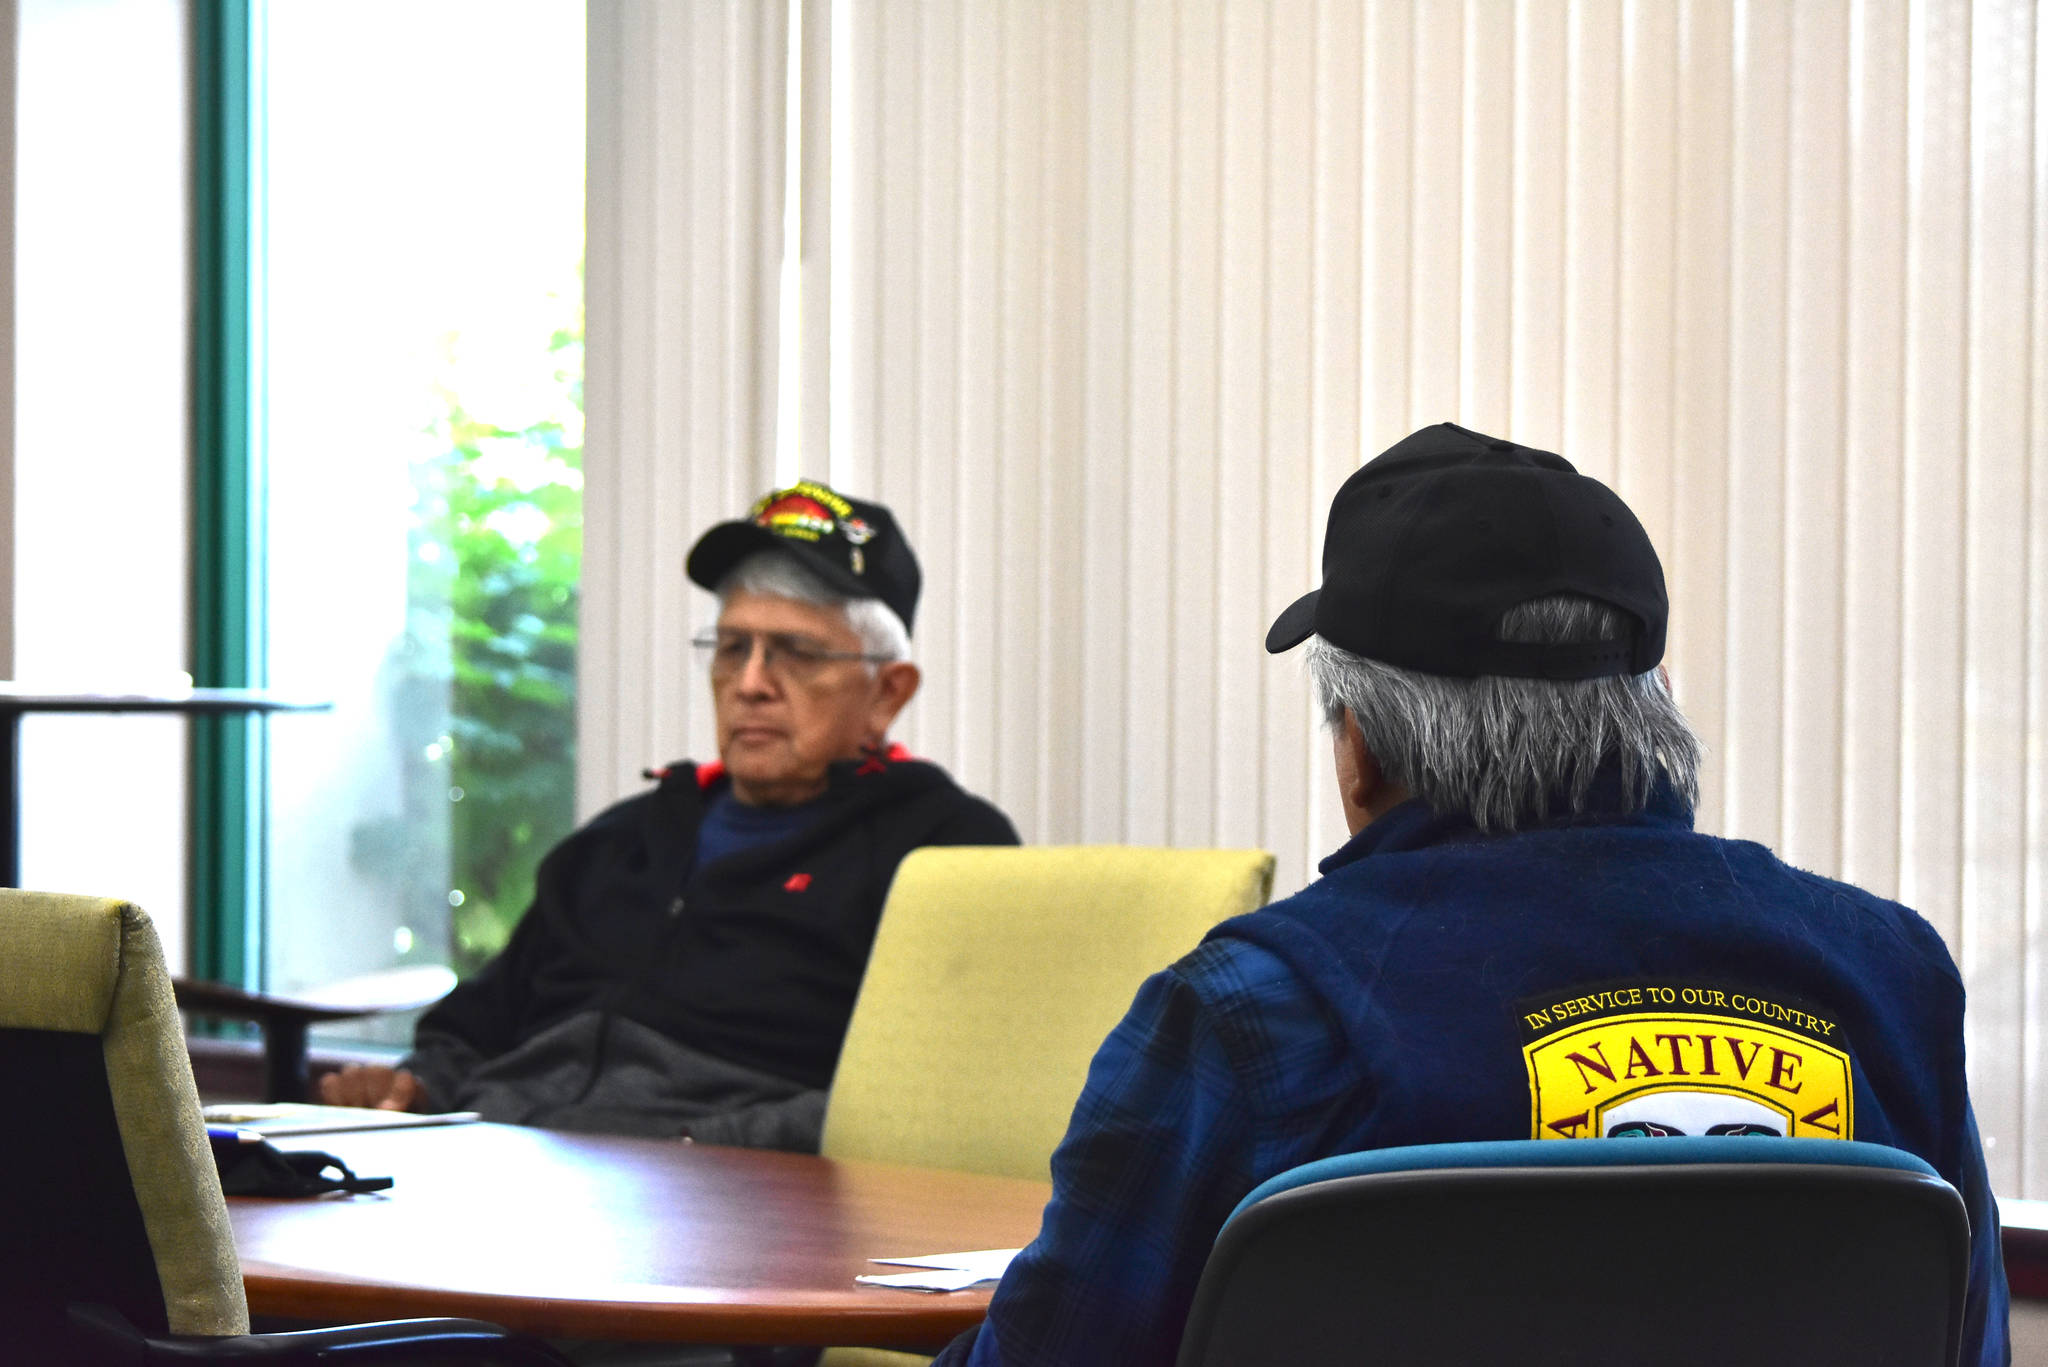 George J. Bennett Sr., left, and Arsenio “Pastor” Credo, right, were among the hundreds of Alaskans who deployed to Vietnam during the war and were collectively welcomed home during an event held by the Southeast Intertribal Collective for National Vietnam War Veterans Day over Facebook Live on March 29, 2021. (Peter Segall / Juneau Empire File)